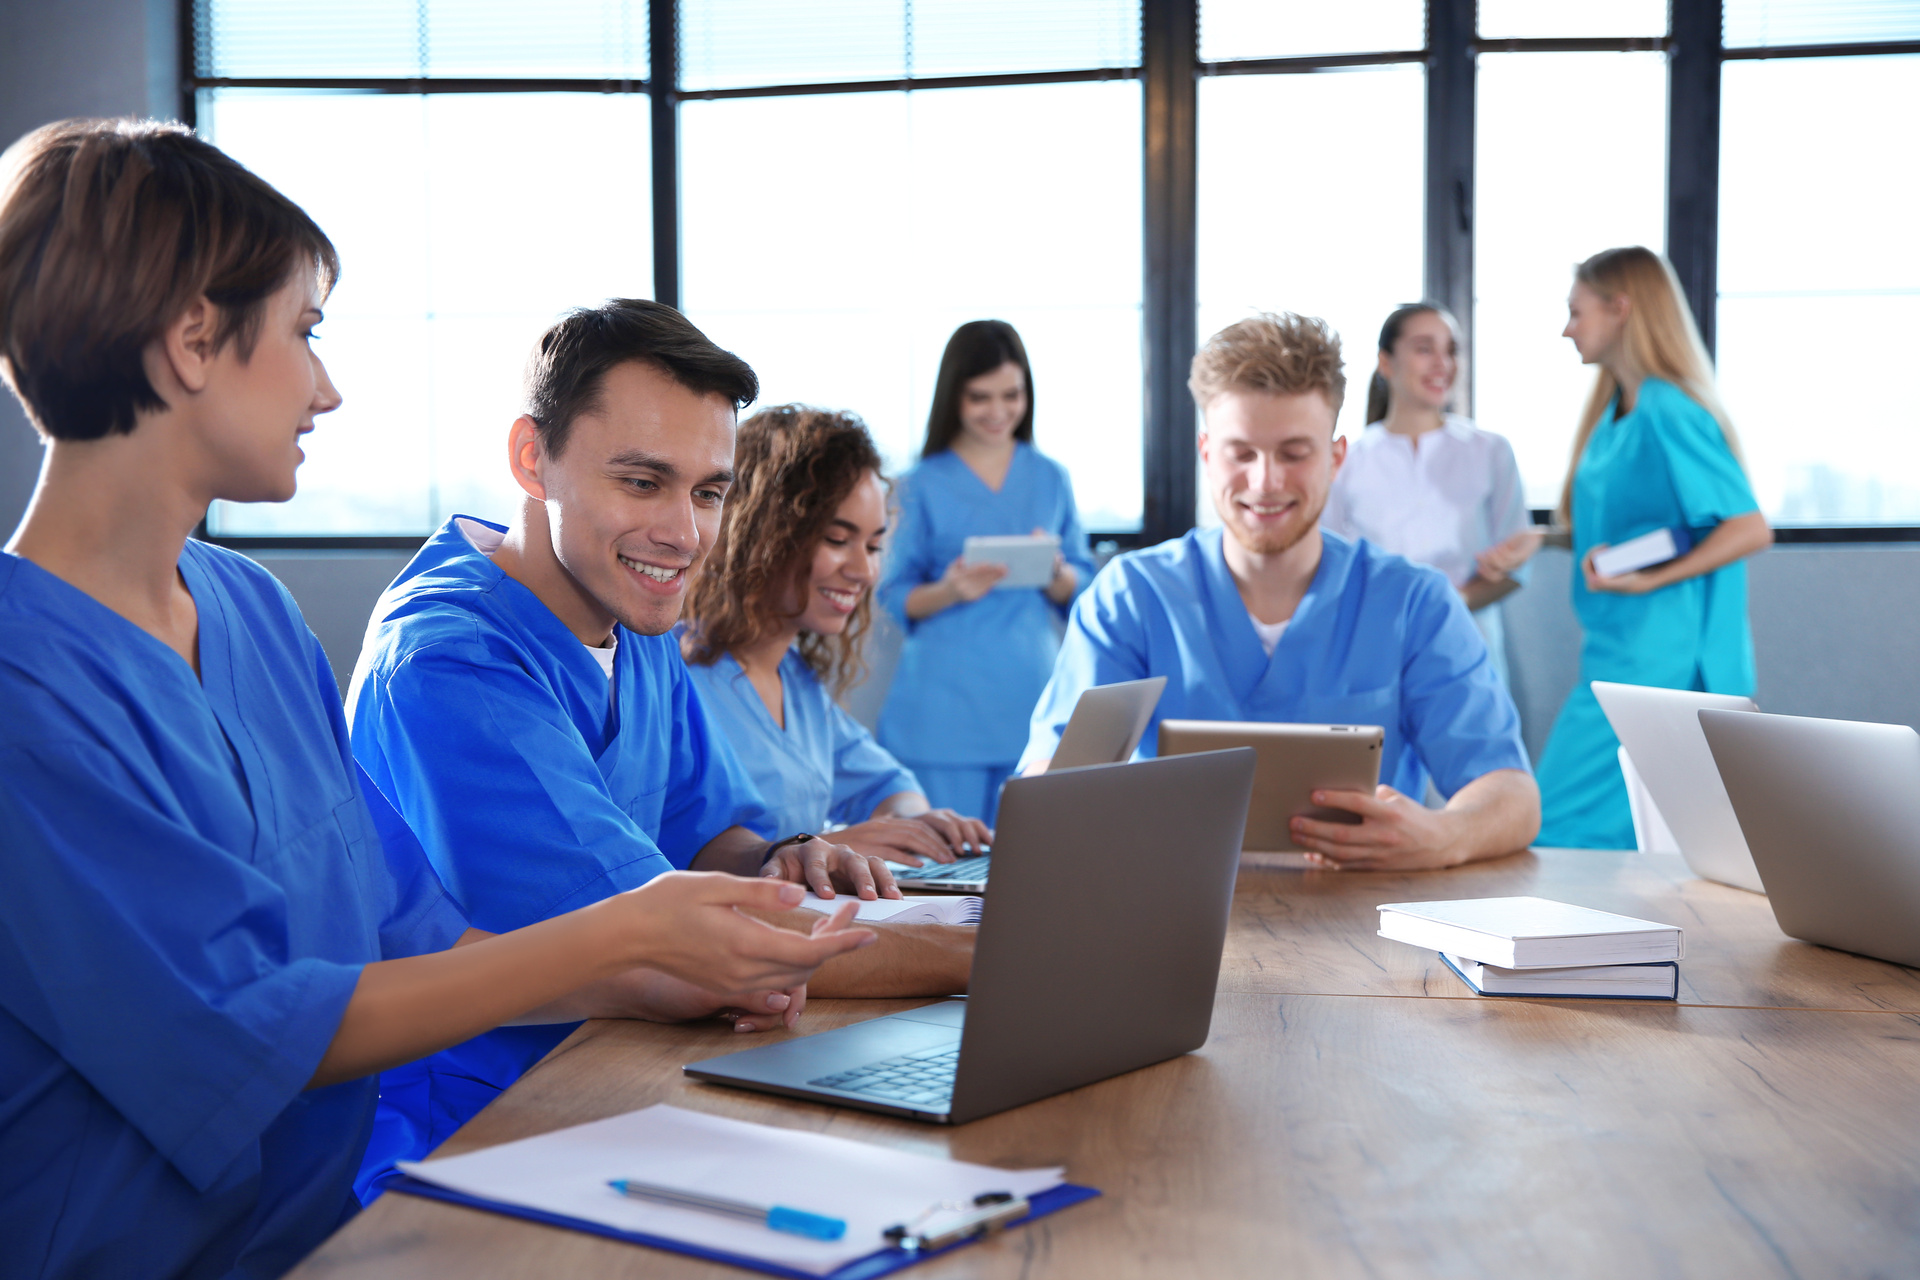 Group of medical students reviewing assignment on laptop